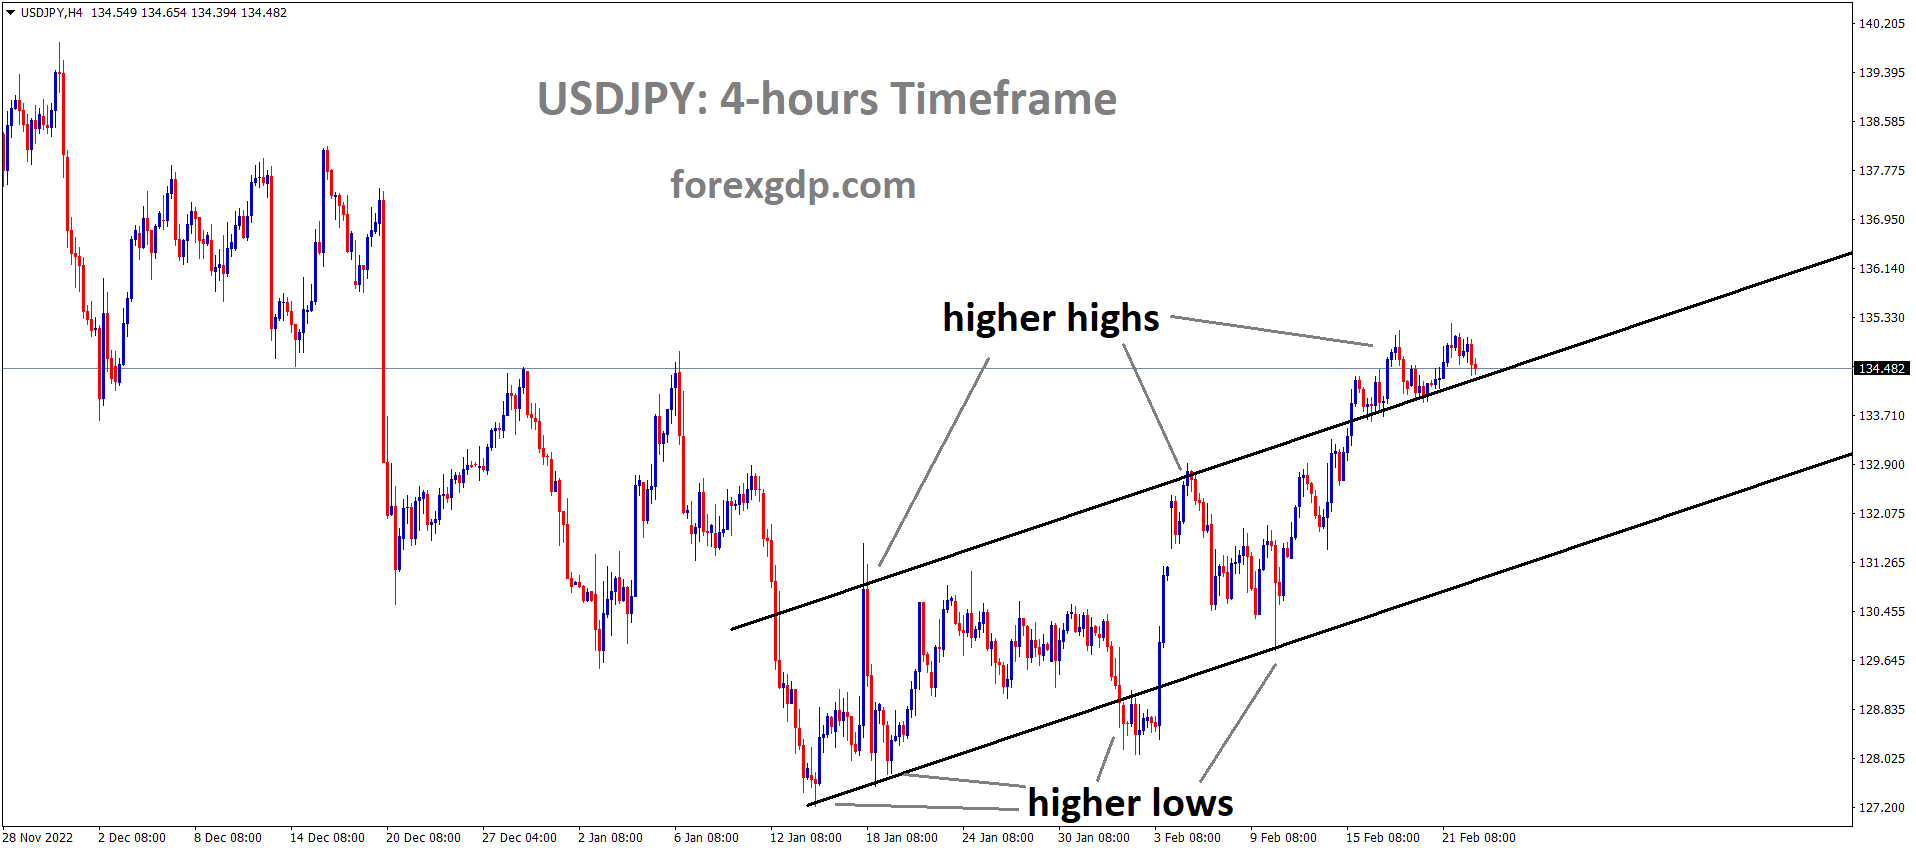 USDJPY is moving in an Ascending channel and the market has reached the higher high area of the channel 1